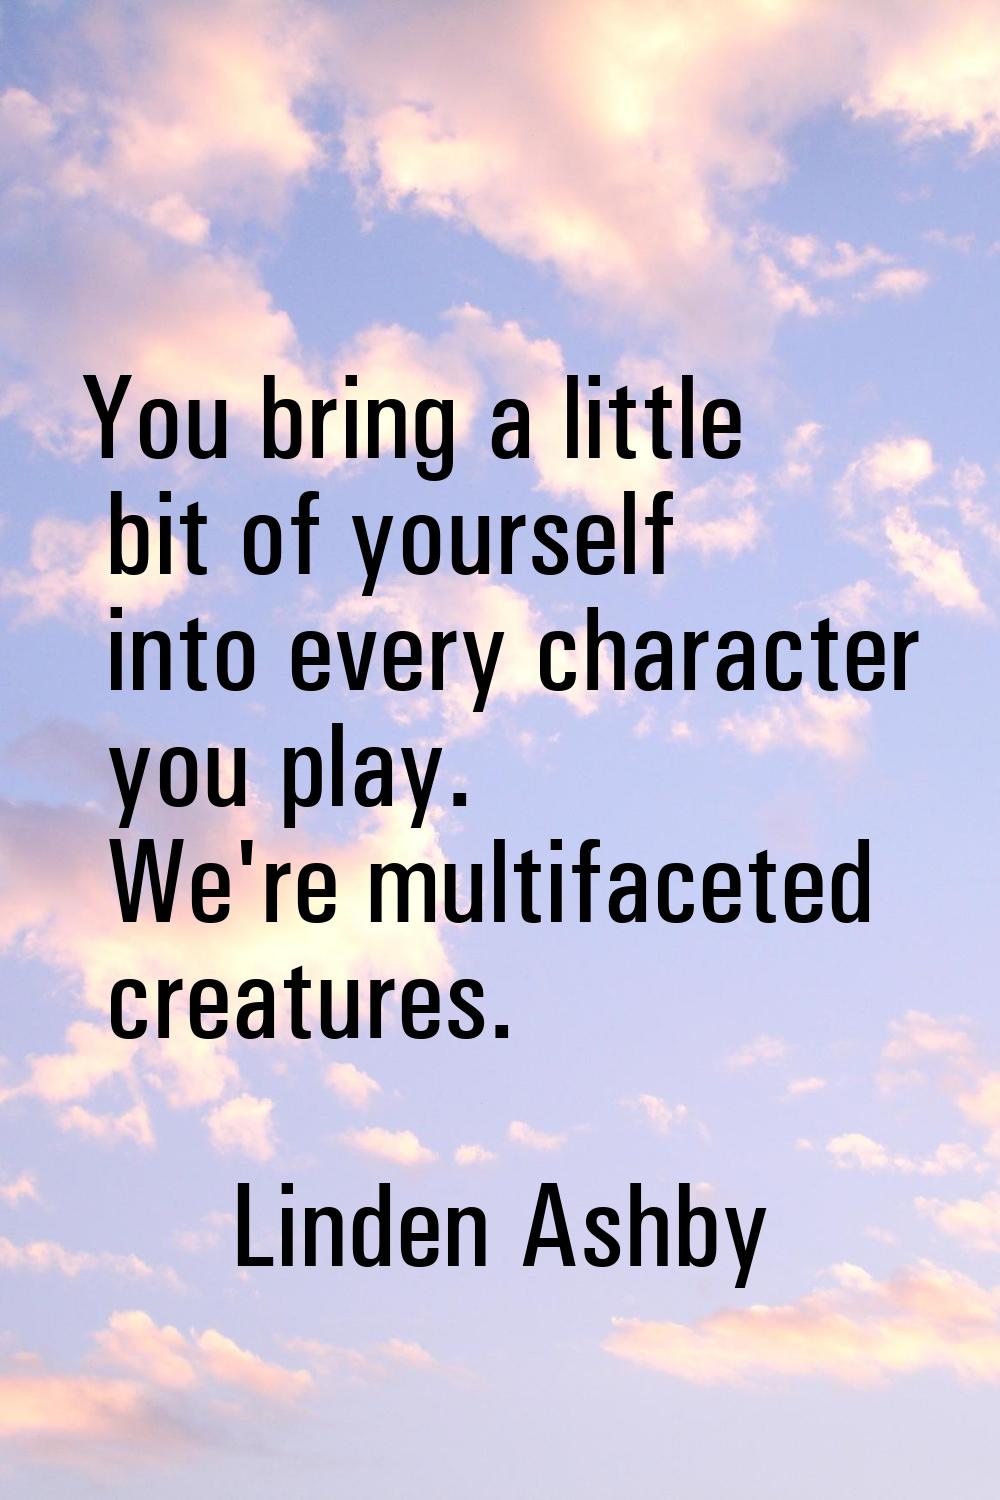 You bring a little bit of yourself into every character you play. We're multifaceted creatures.